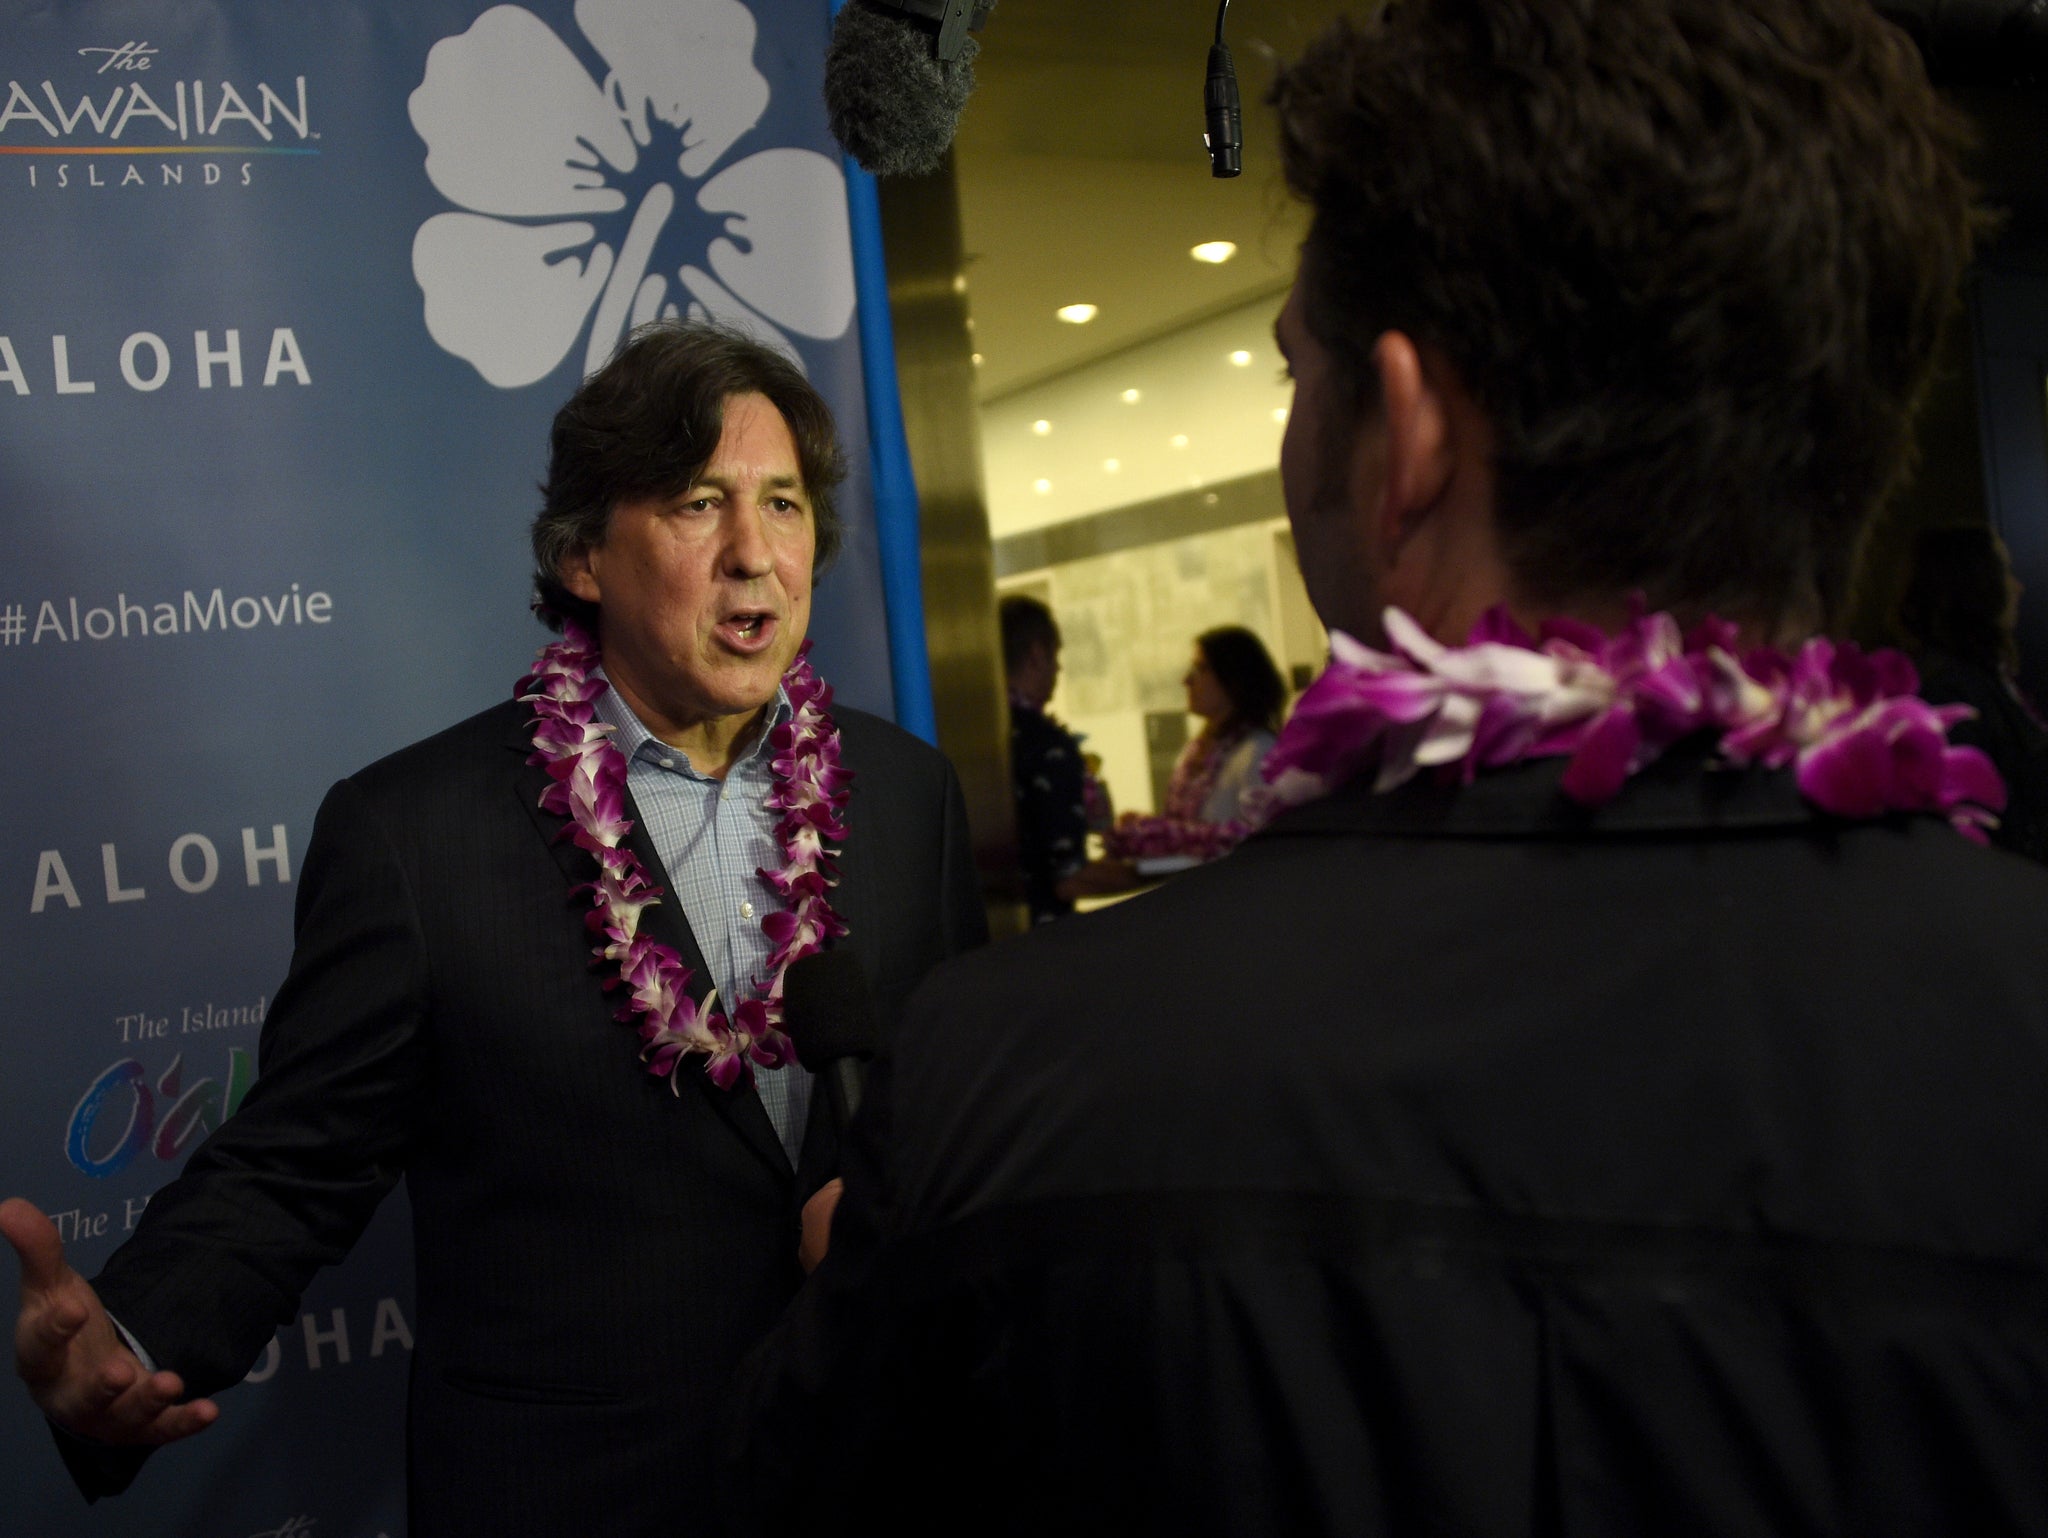 Cameron Crowe wearing floral necklaces at the Aloha premiere